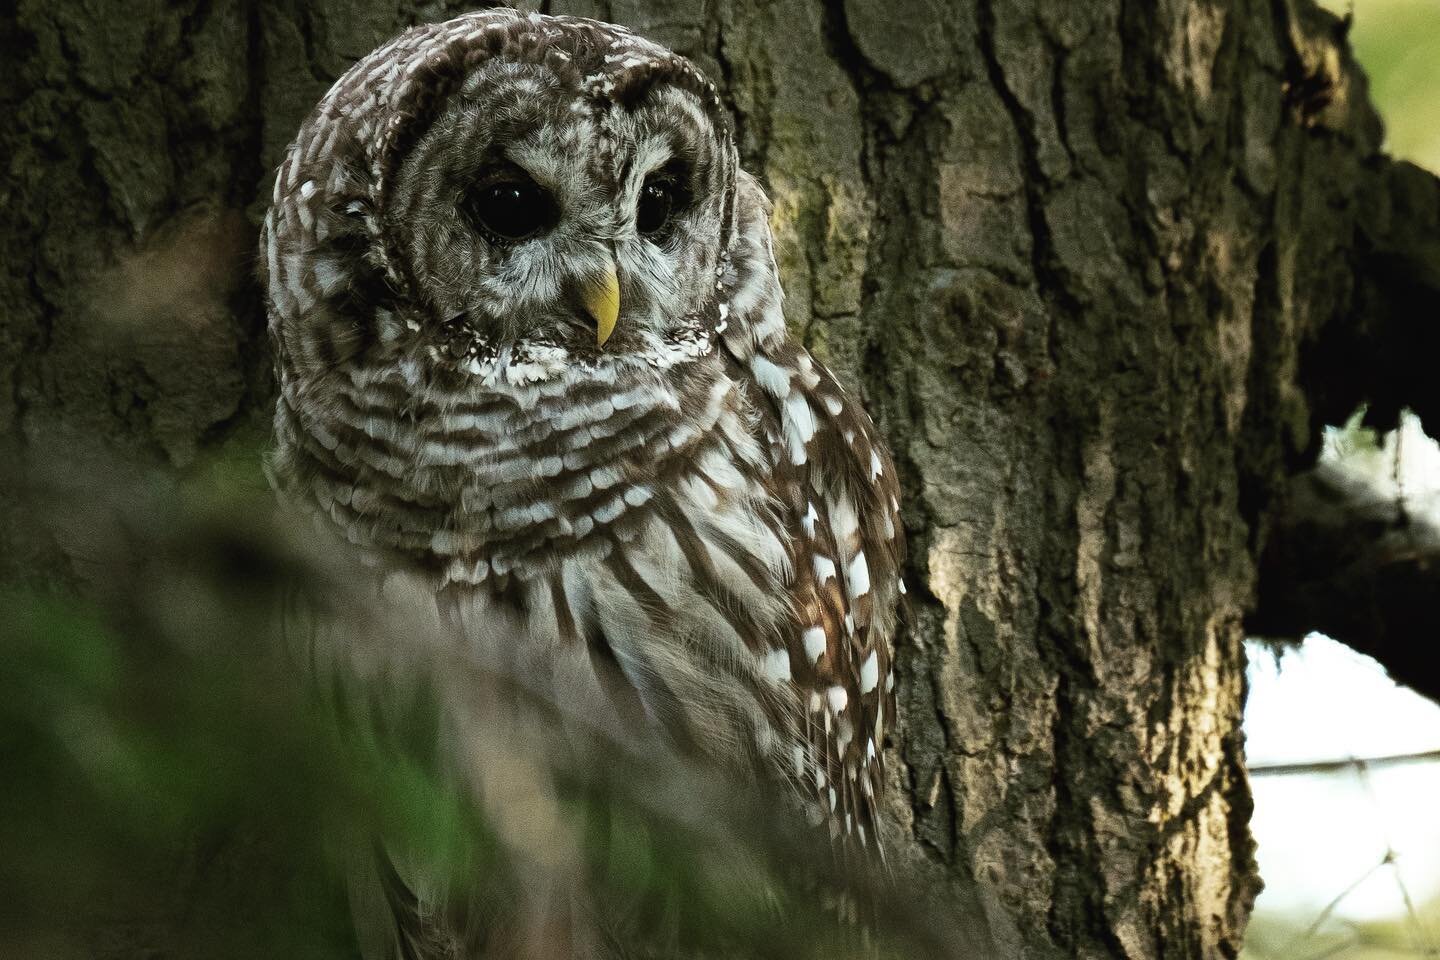 Another barred owl from my encounter the other day.